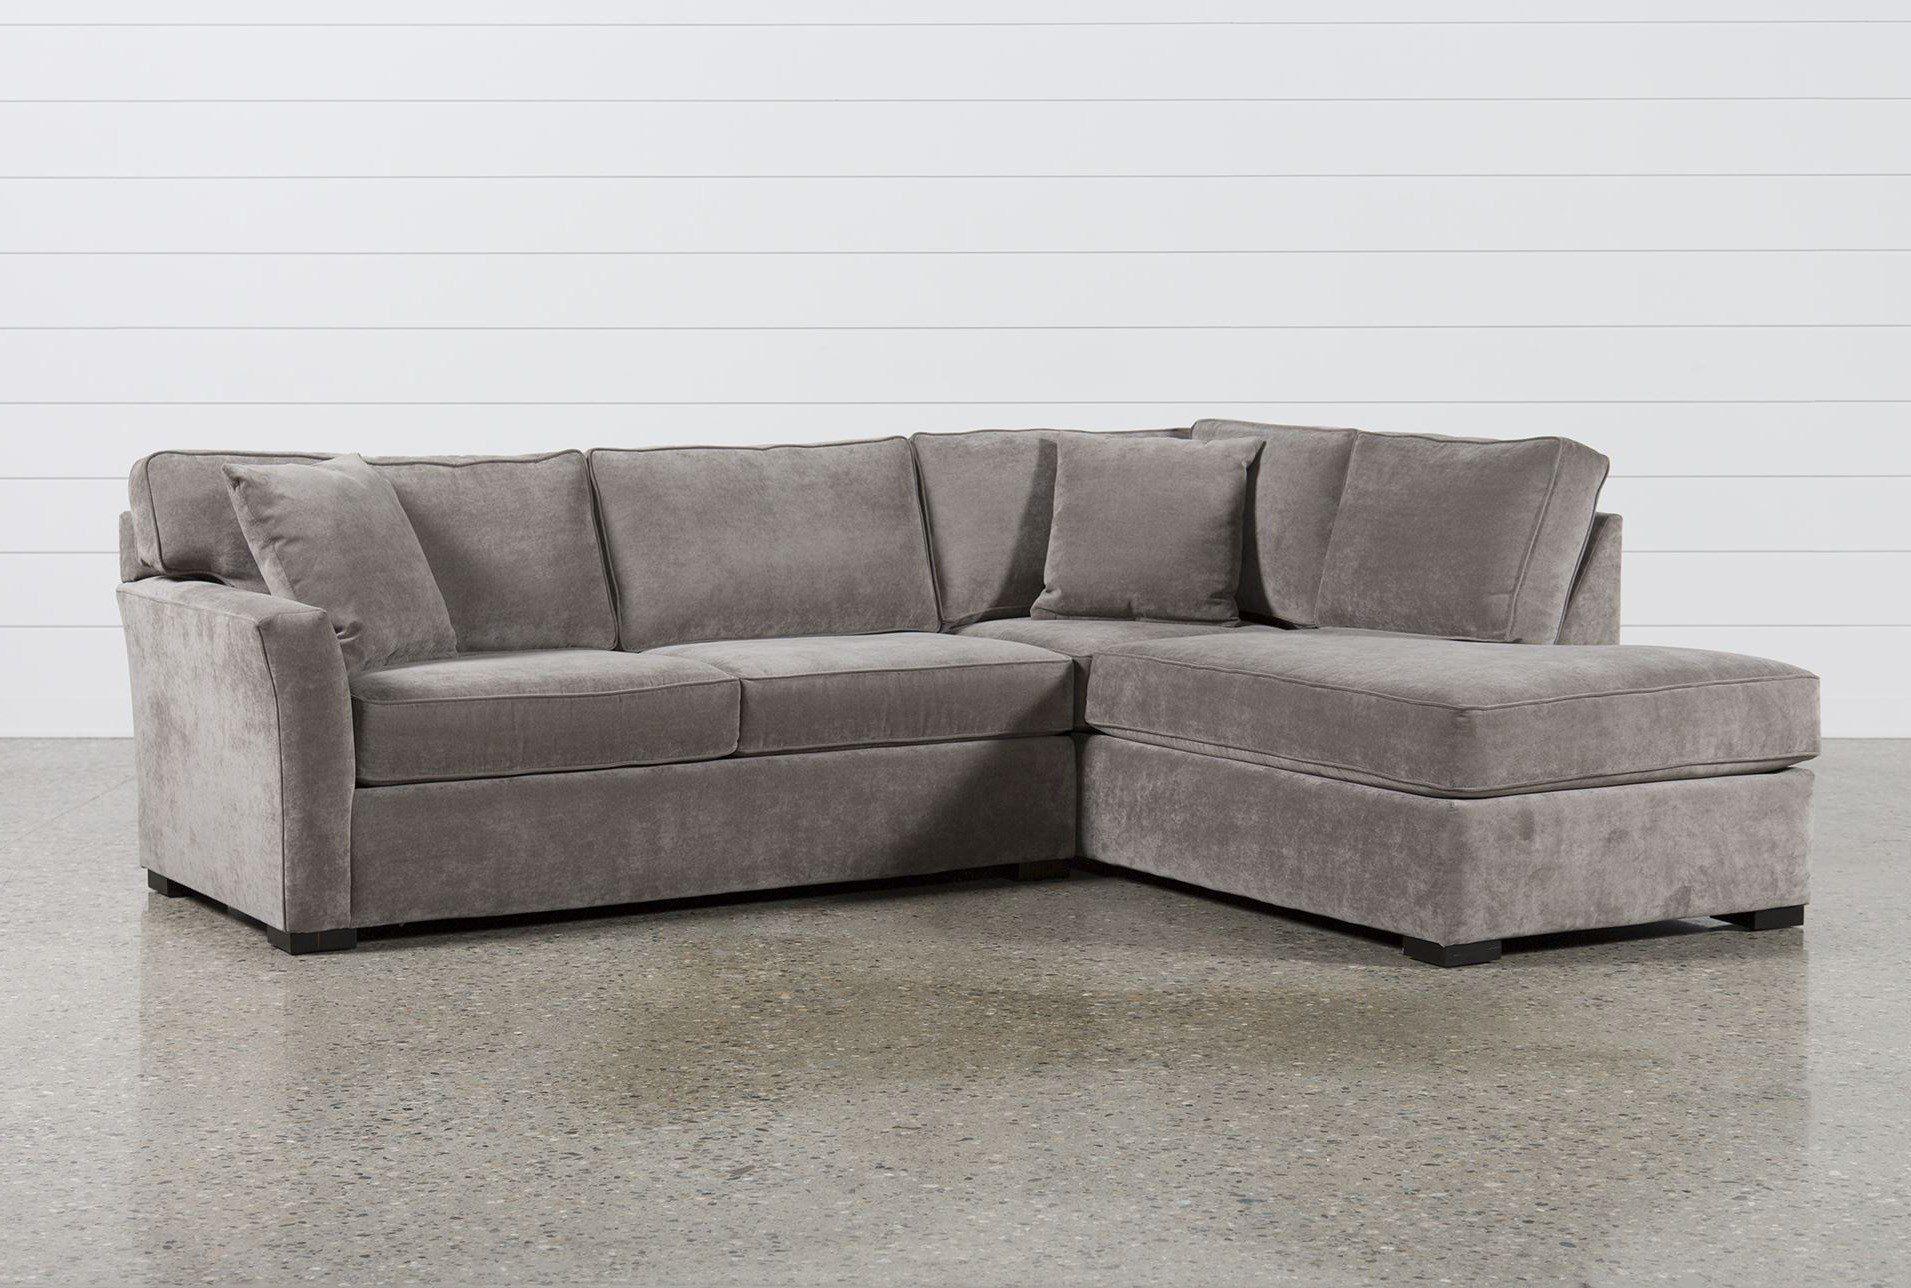 sealy sectional sofa bed